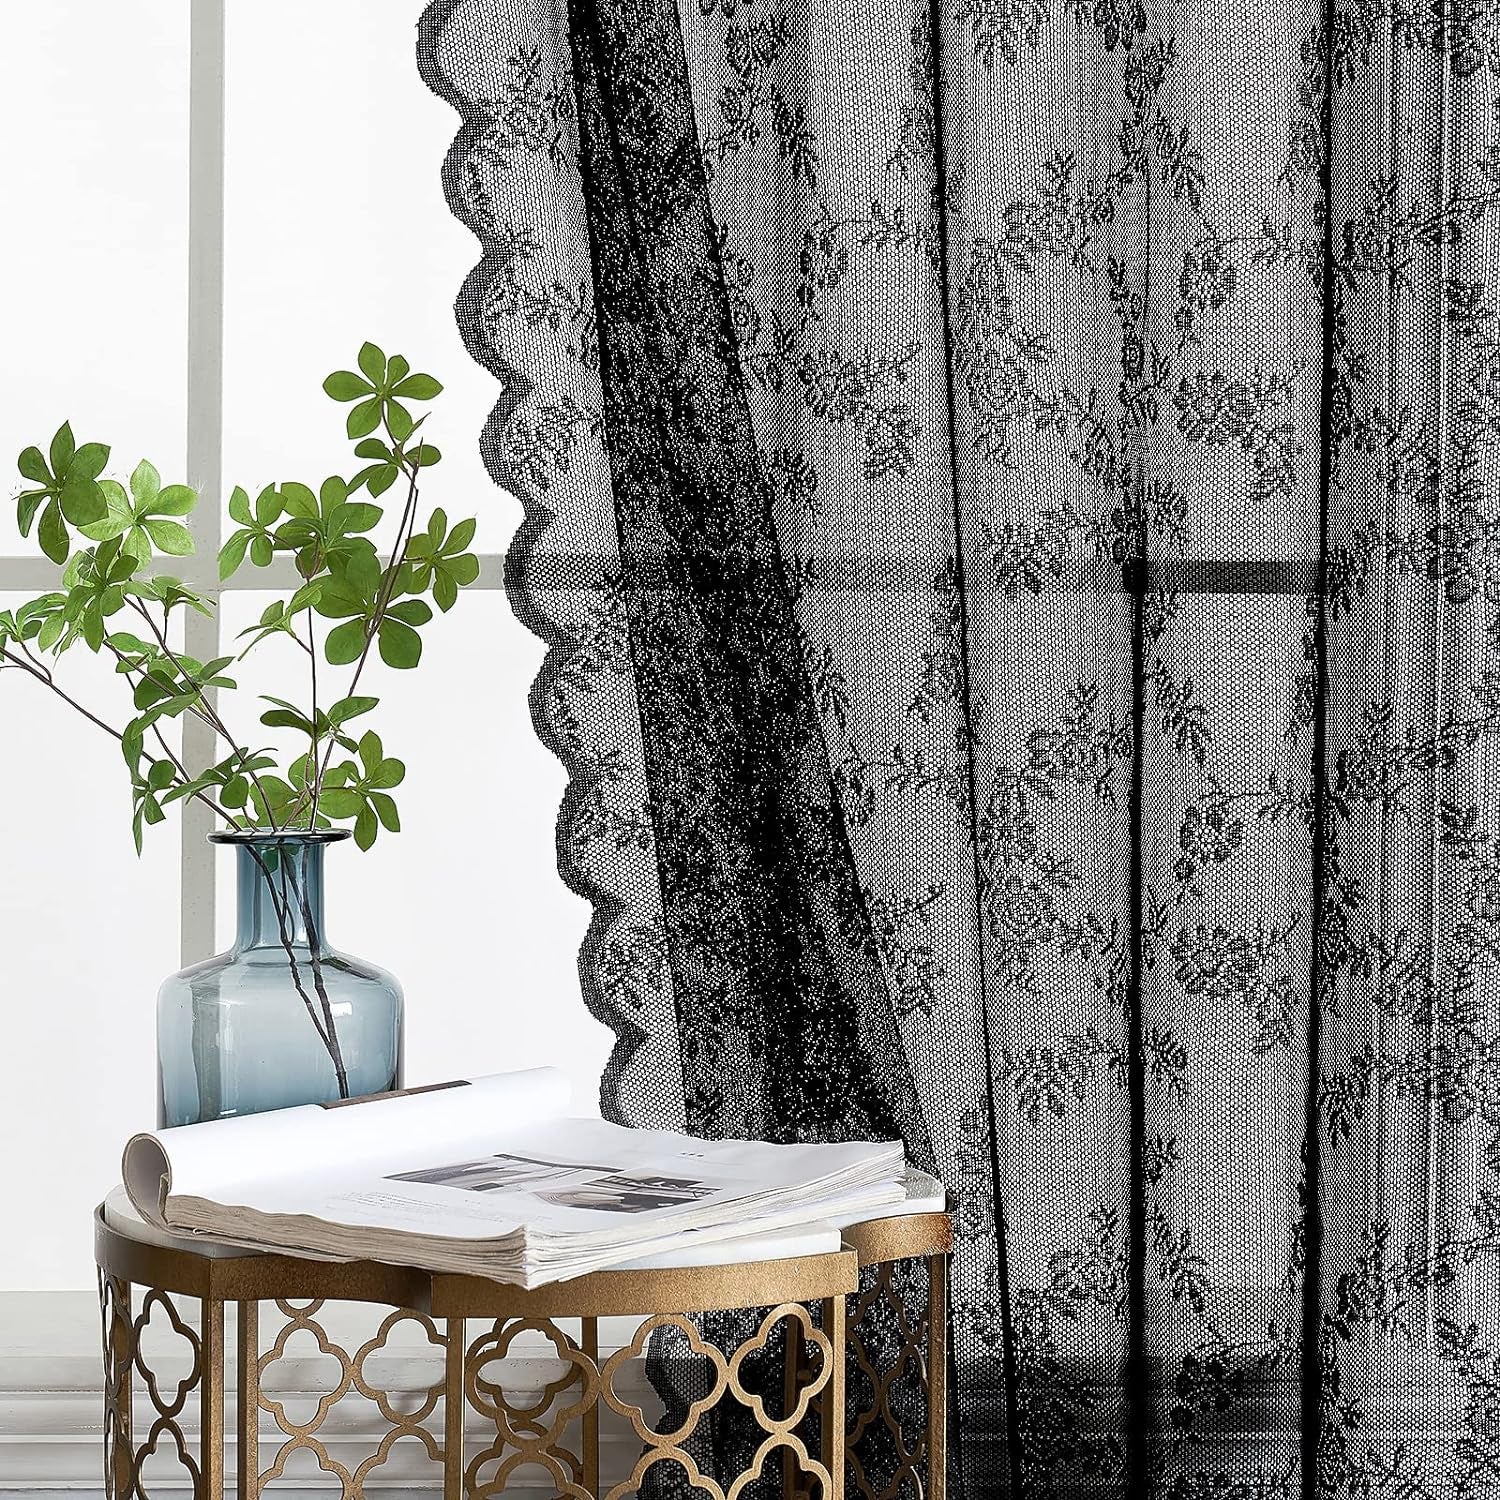 MIULEE White Lace Curtains 84 Inches Long for Living Room Bedroom, Scalloped Sheer Curtains Rose Floral Embroidered Farmhouse Window Drapes Vintage European Tulle Retro Style, Rod Pocket, 2 Panels Set  MIULEE Black 58 W X 84 L 